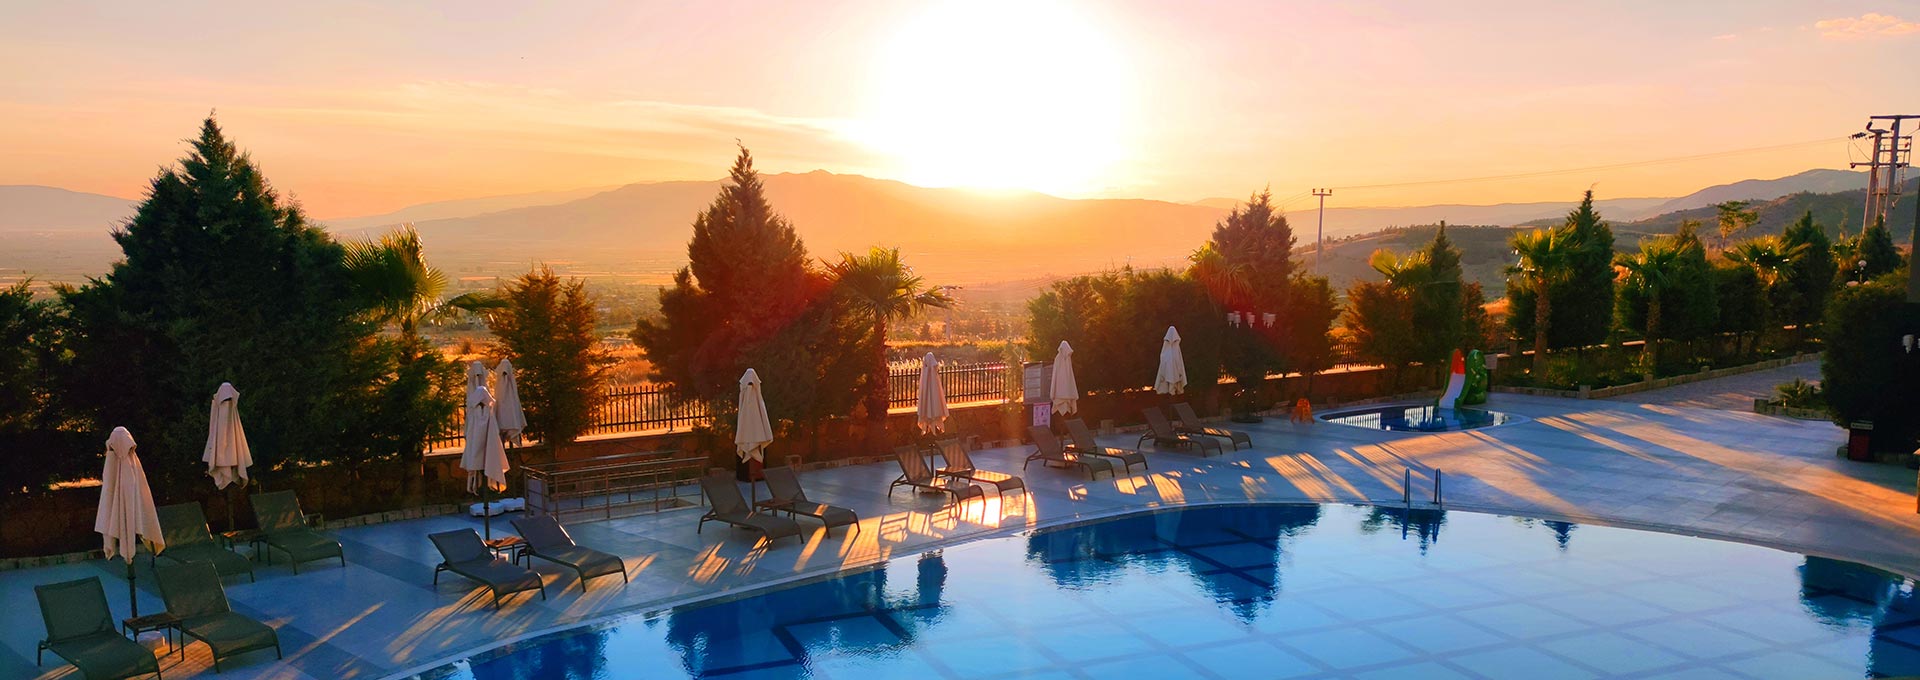 Hierapark Thermal& Spa Hotel